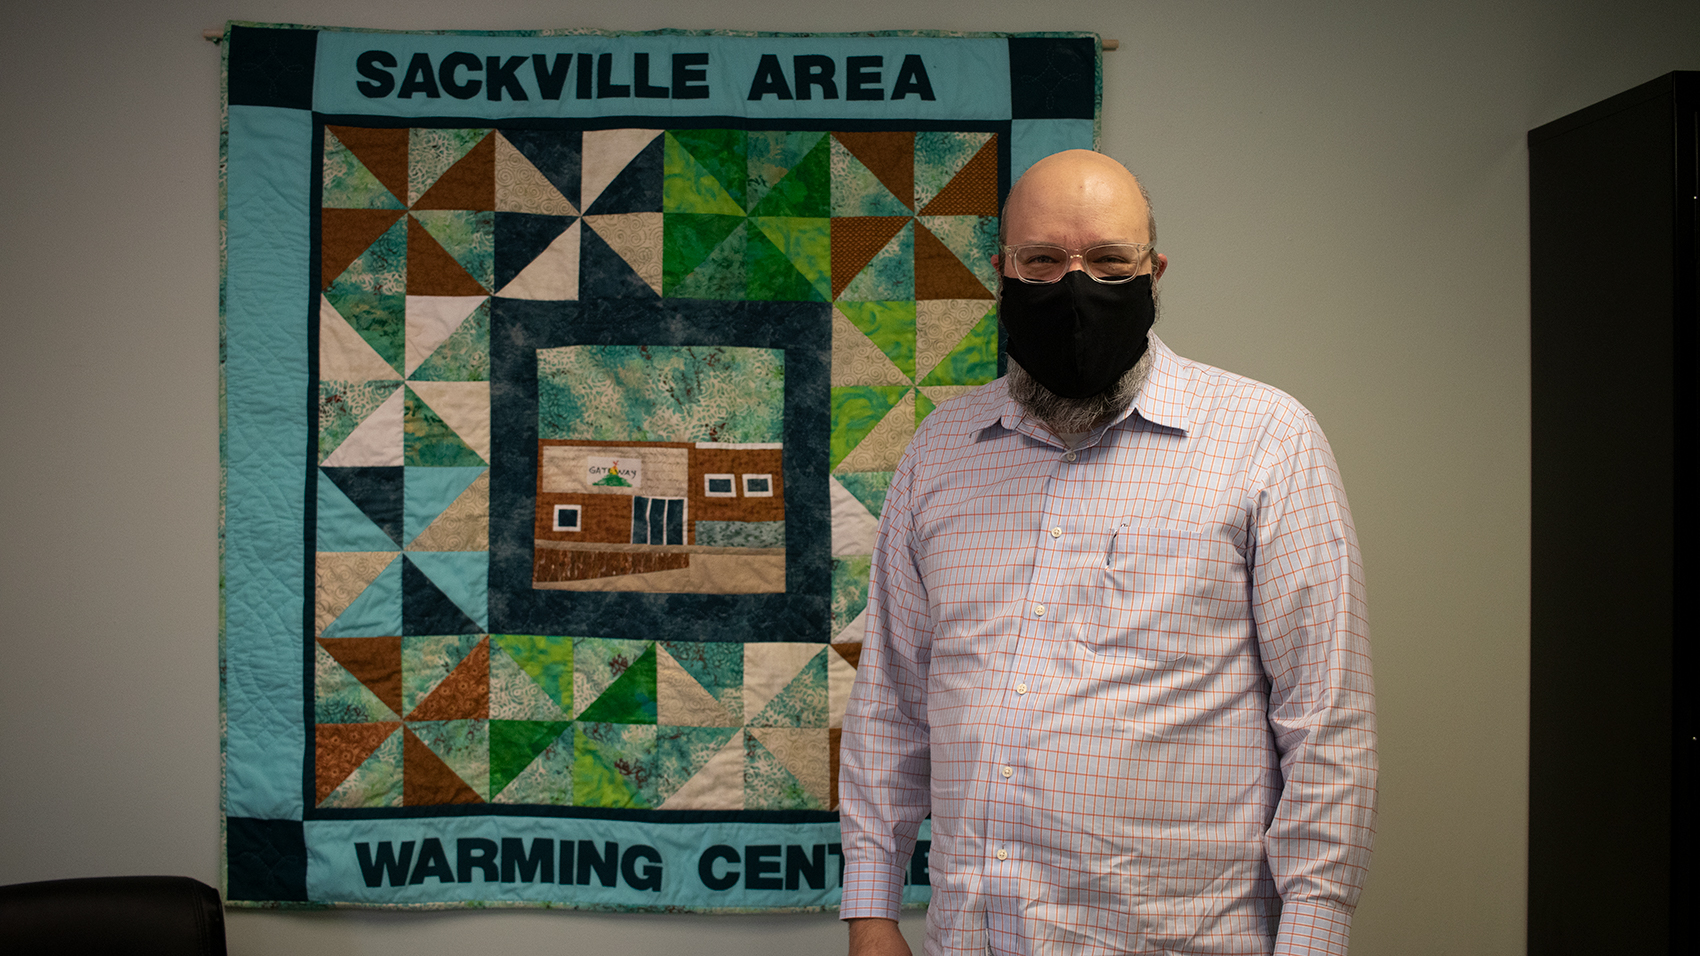 Mike Poworoznyk stands in front of a quilt inside the Sackville Area Warming Centre.